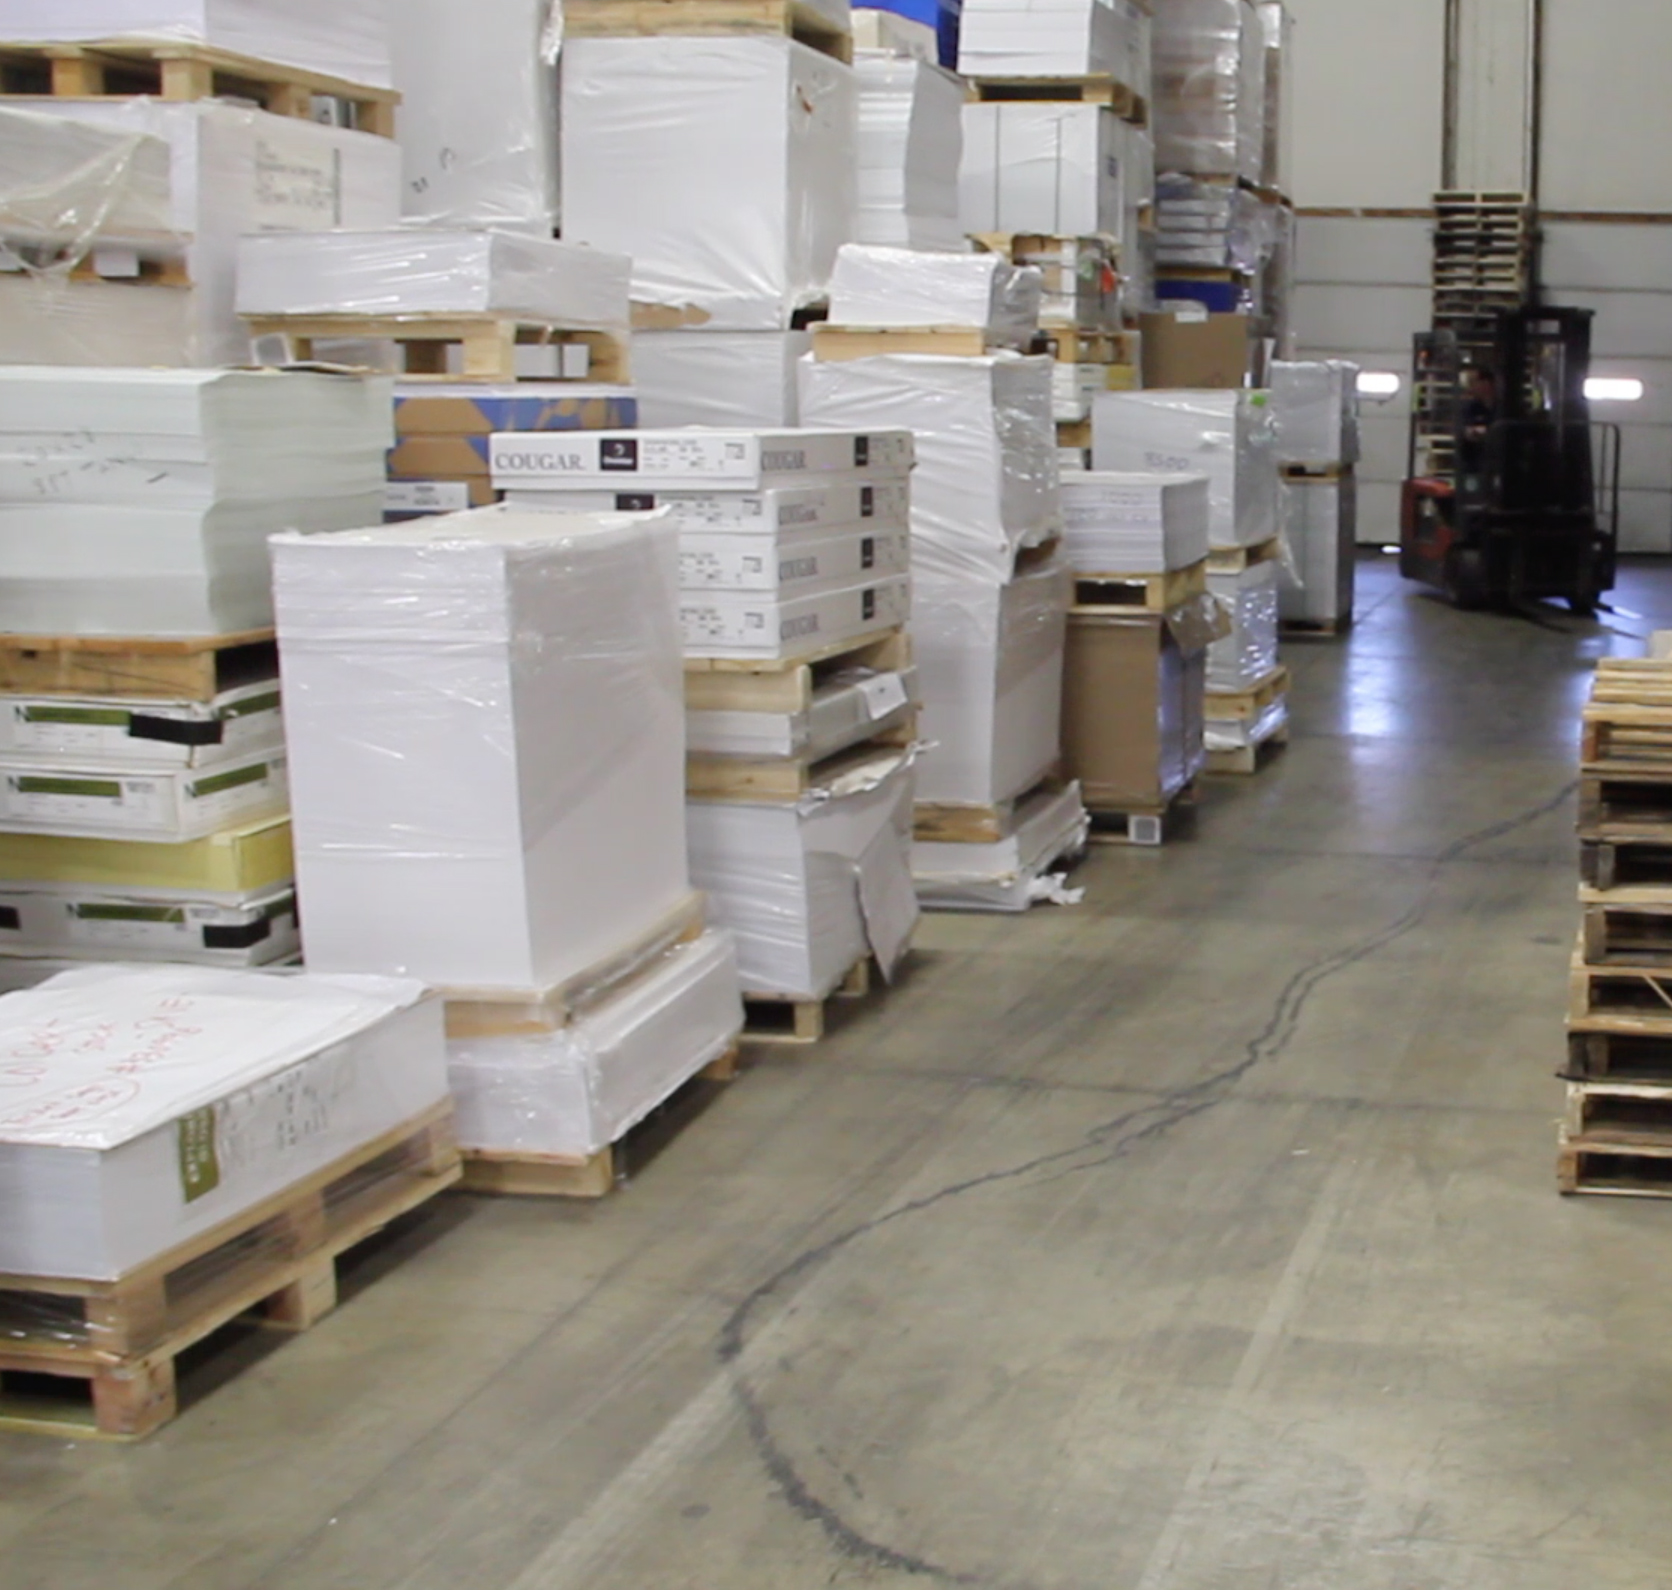 Big Box, Retail Store, Franchise Logistics, Shipping, Delivery, Trucking, Chicago